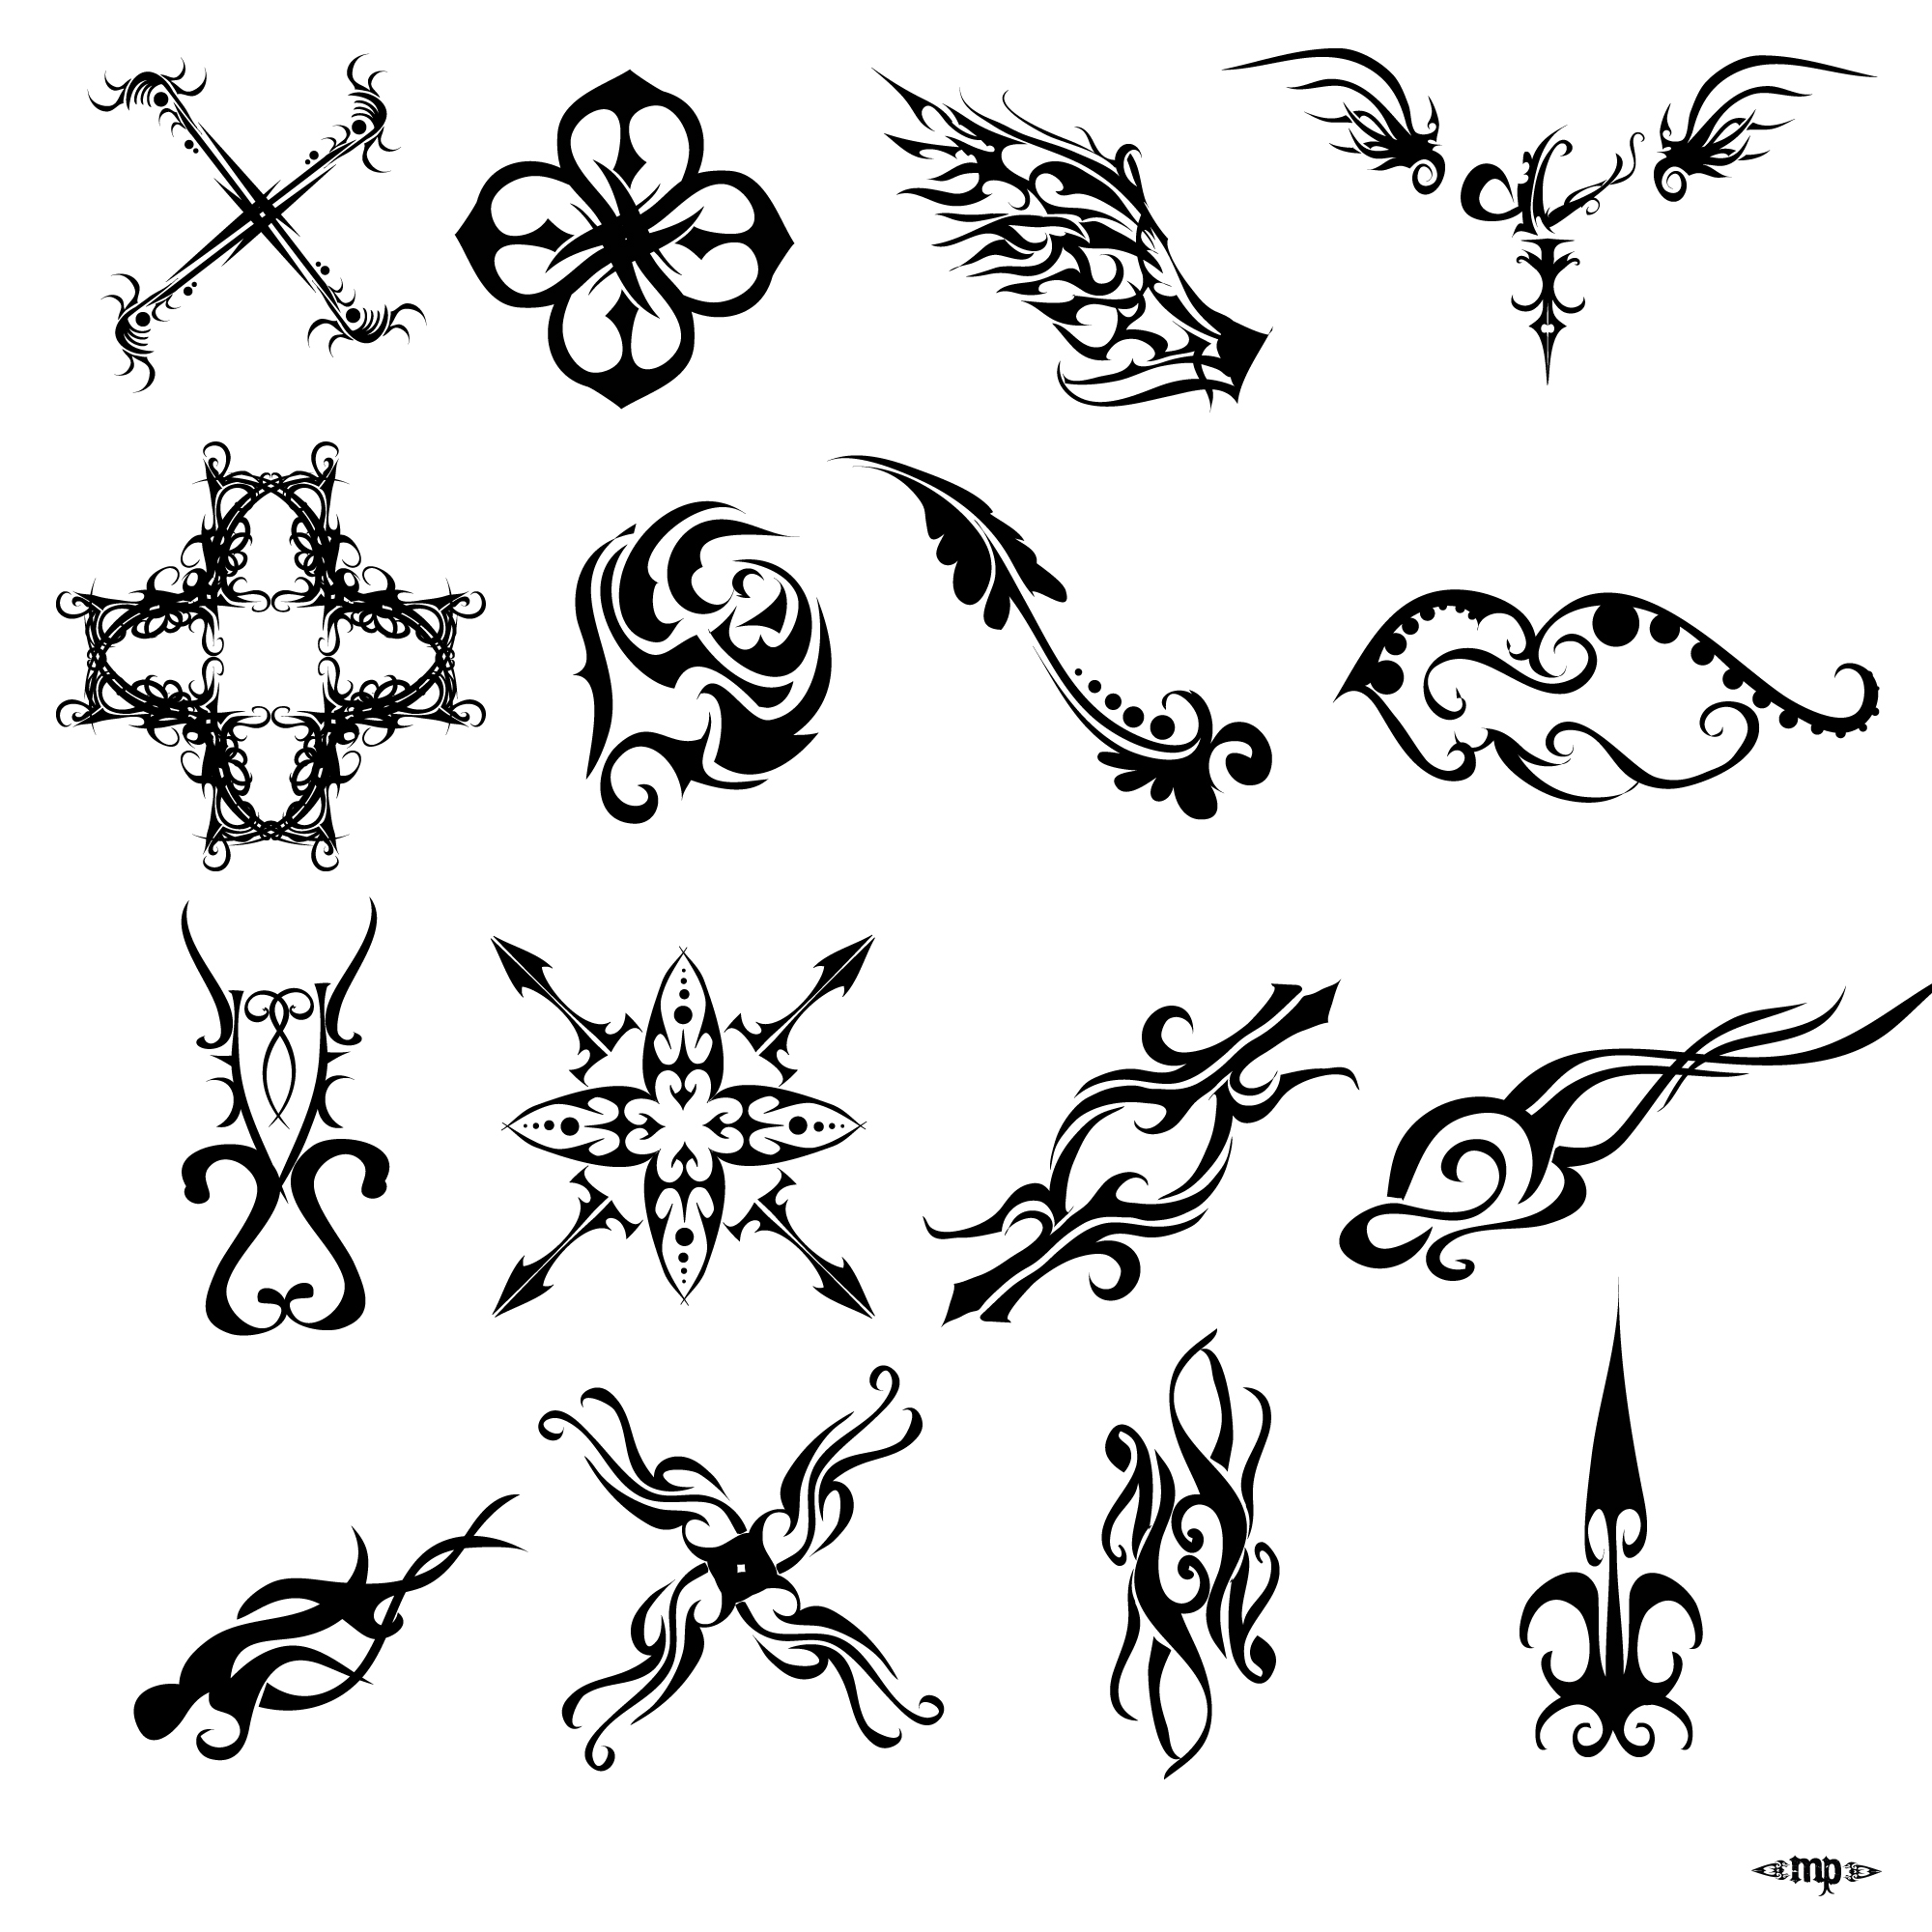 Some Tattoo Design III... by MPtribe on DeviantArt